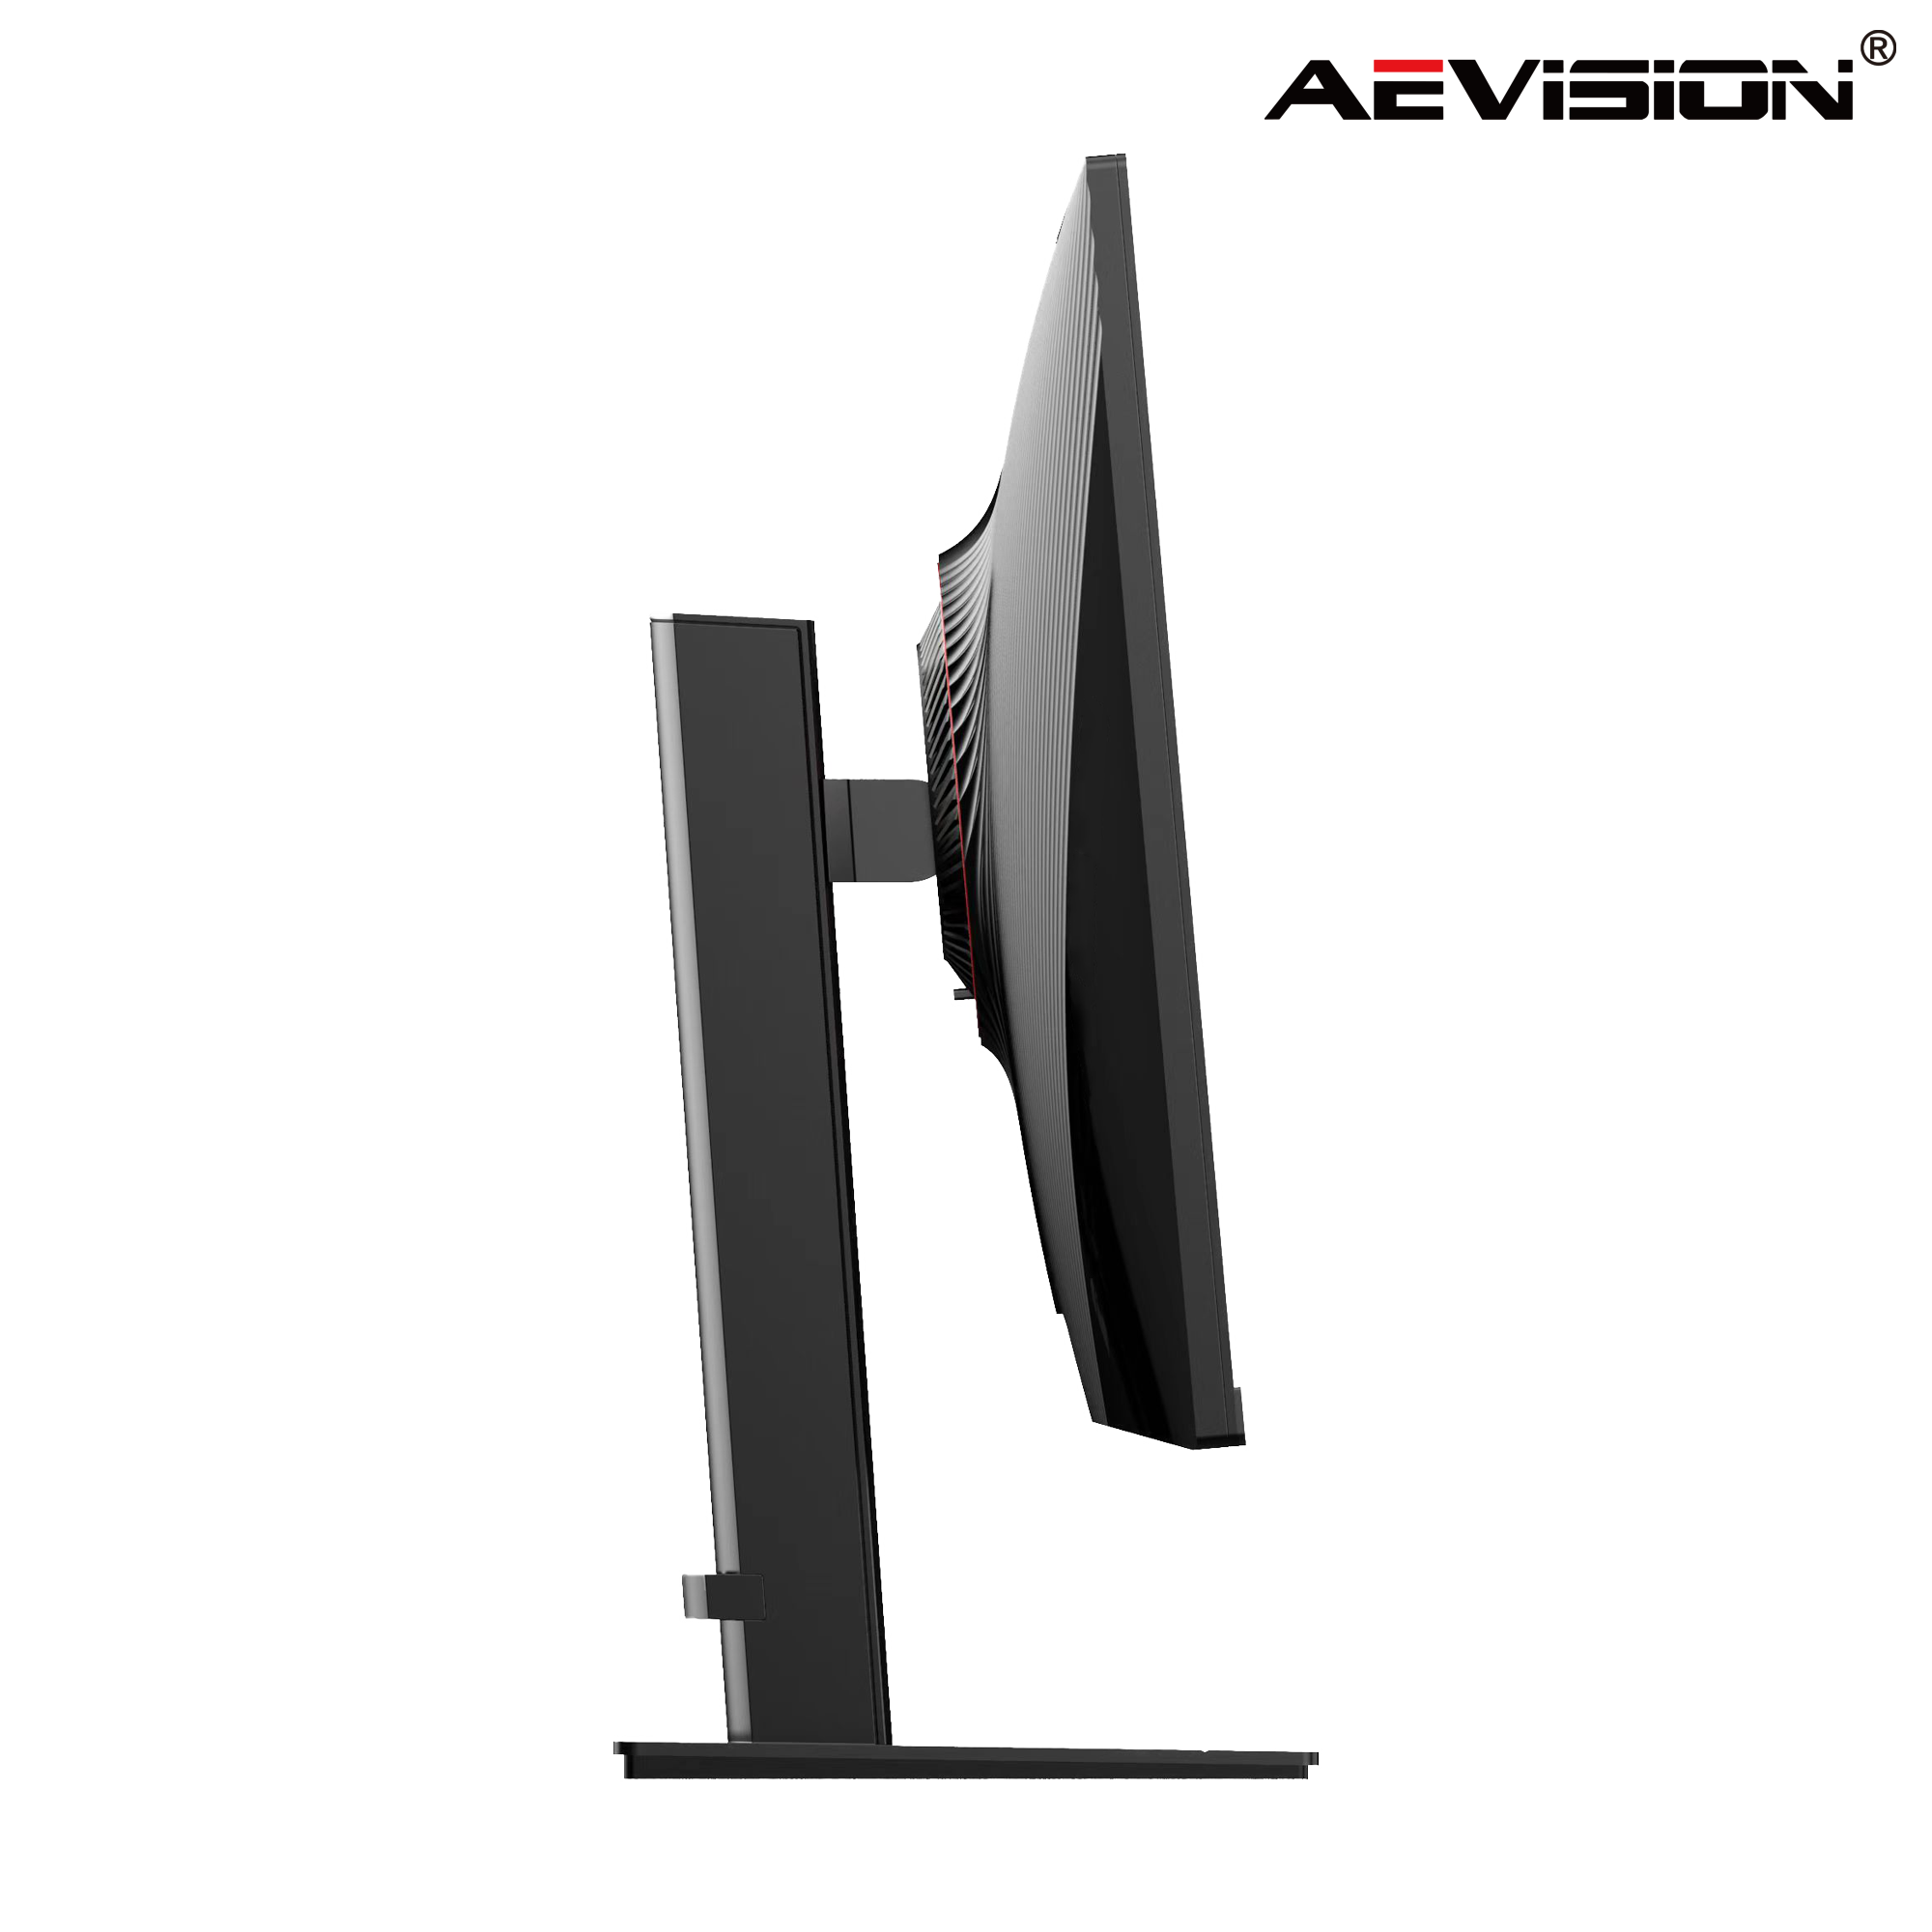 Aevision C4 Full HD (1920 x 1080) Gaming Monitor